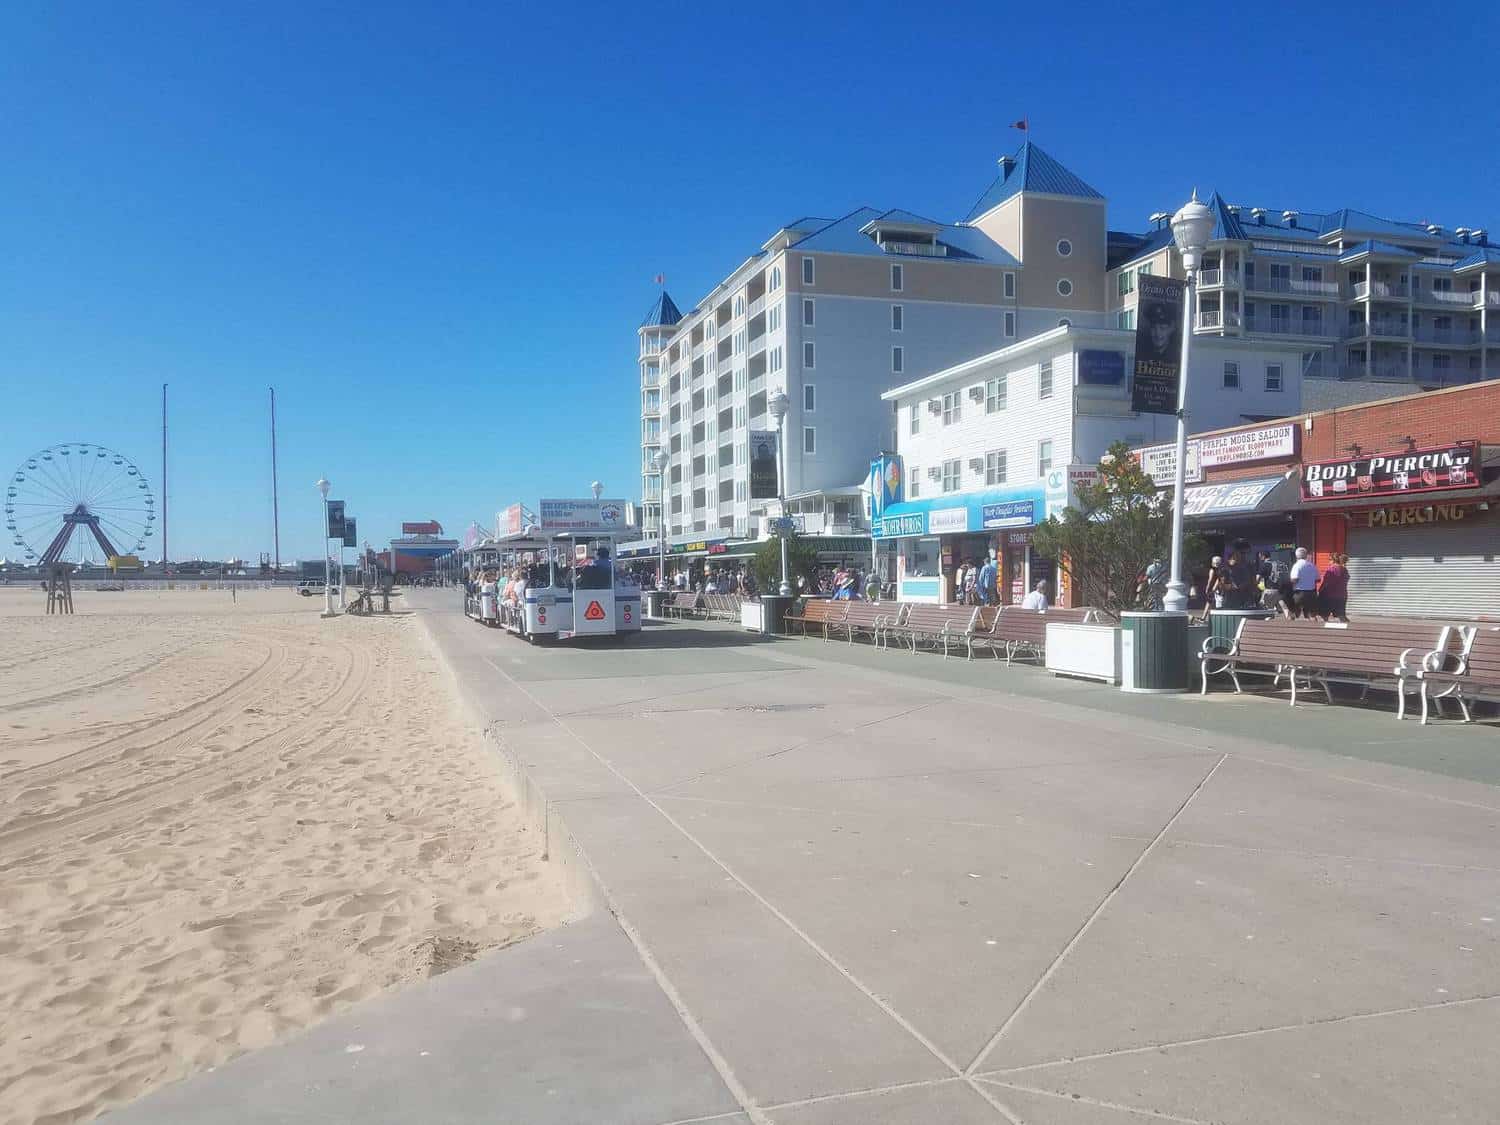 Guide to the Ocean City, MD Boardwalk Virtual Tour